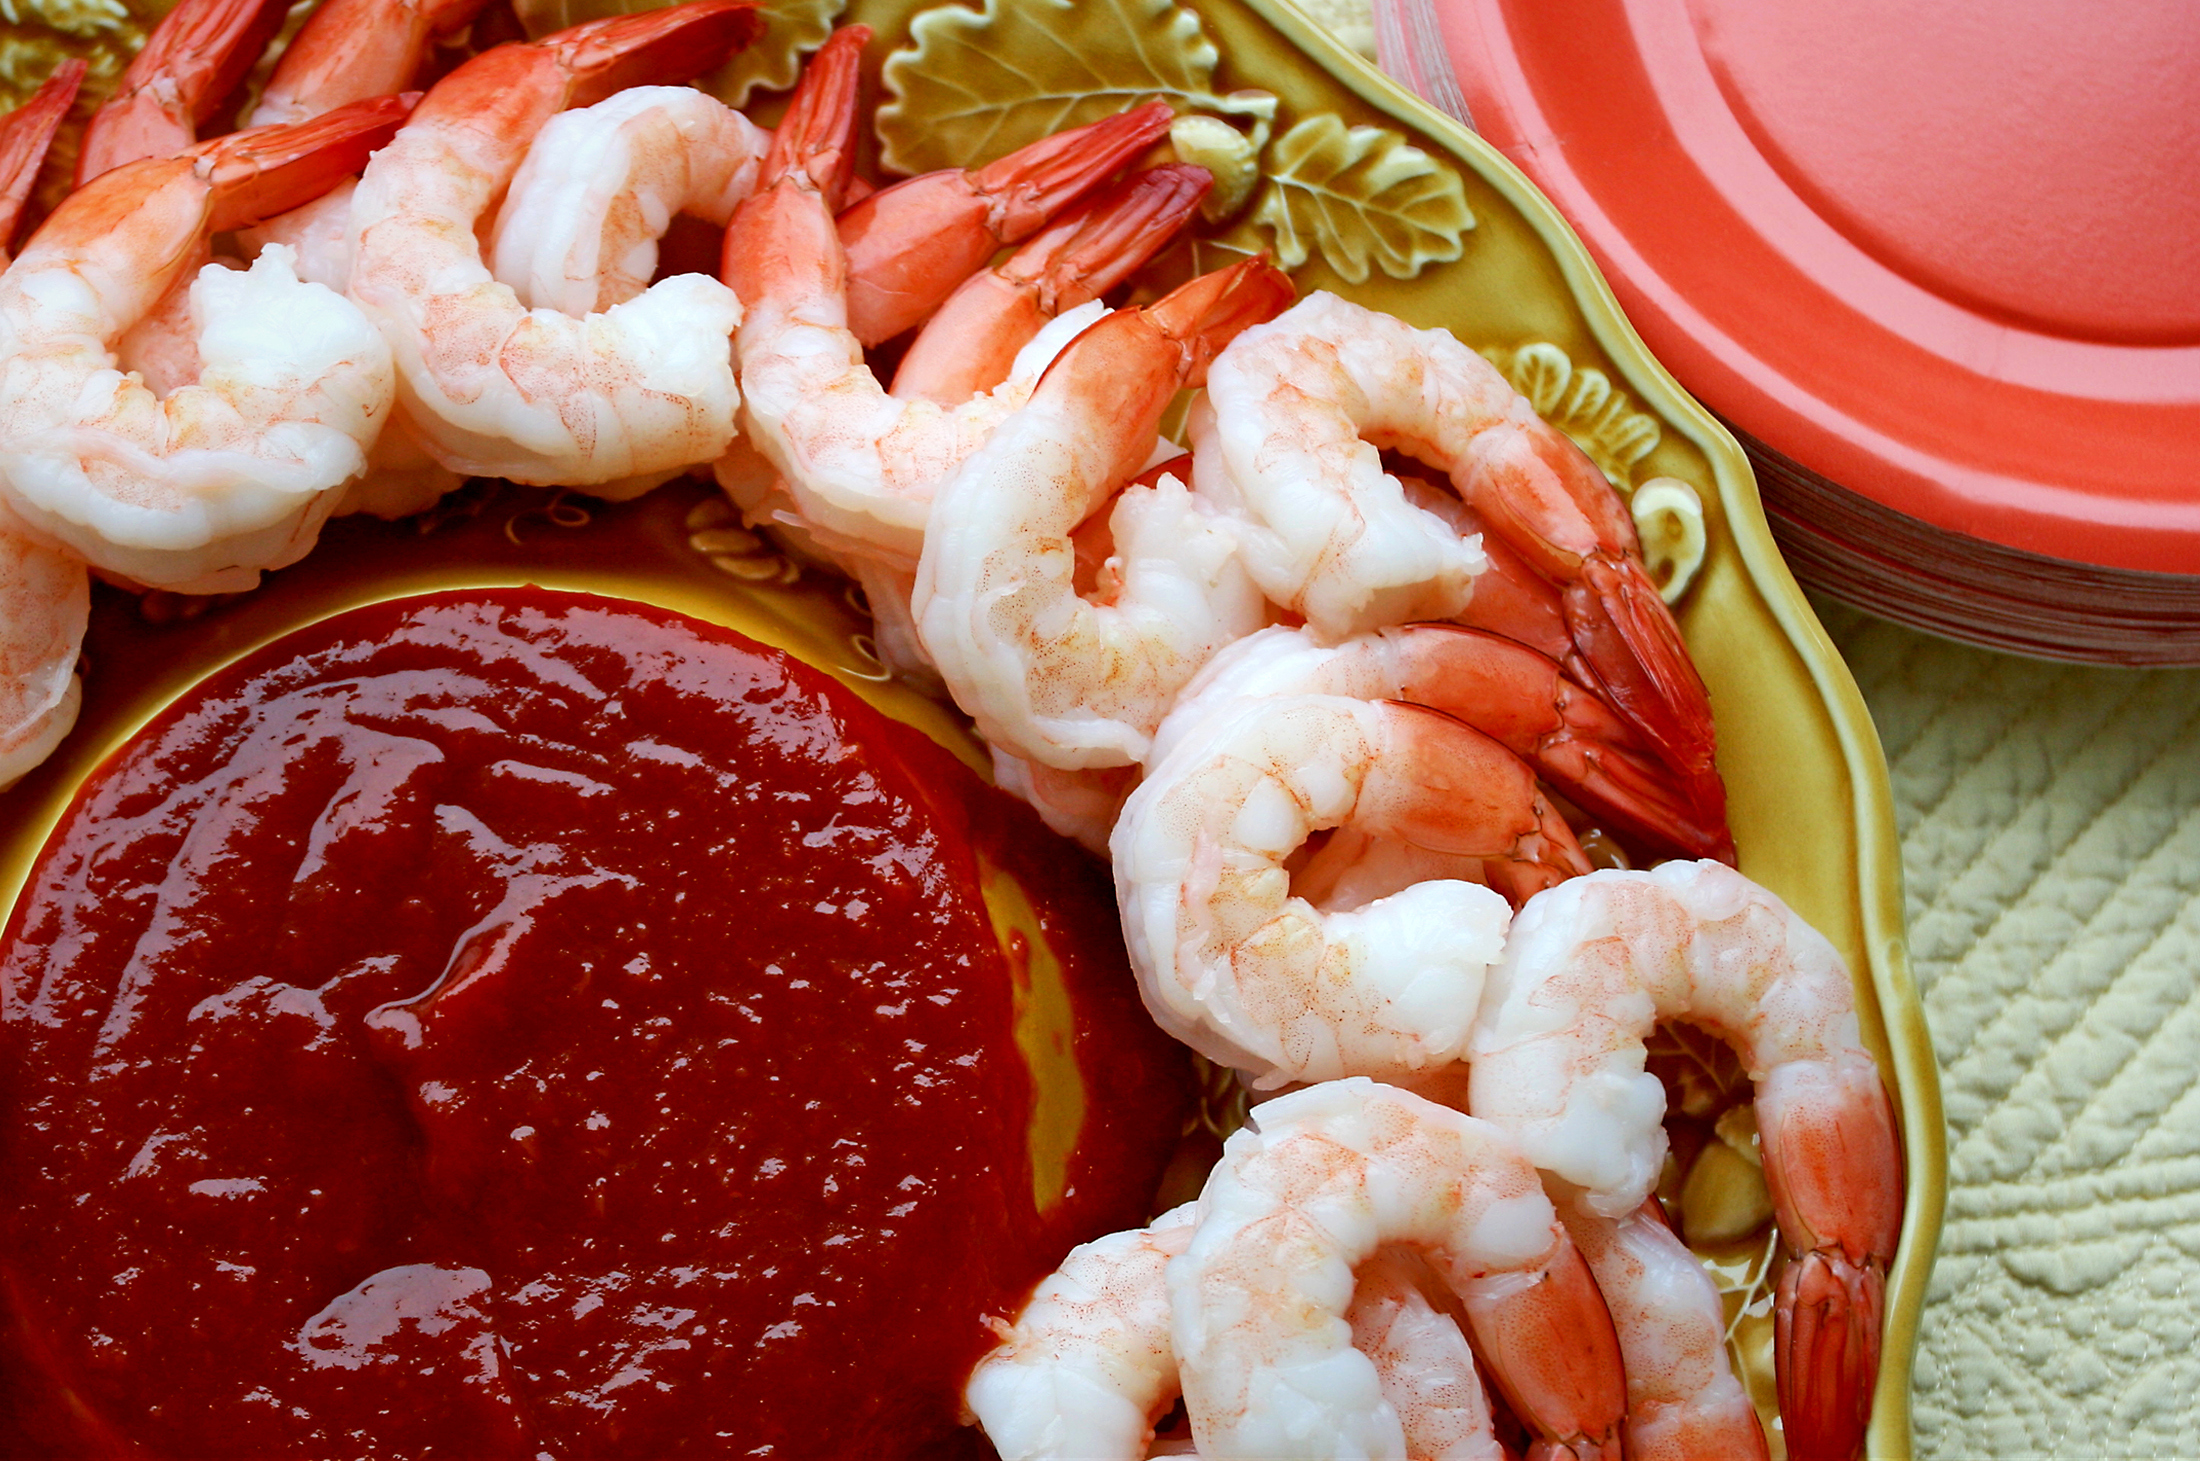 PHOTO: This stock photo depicts a platter of shrimp.